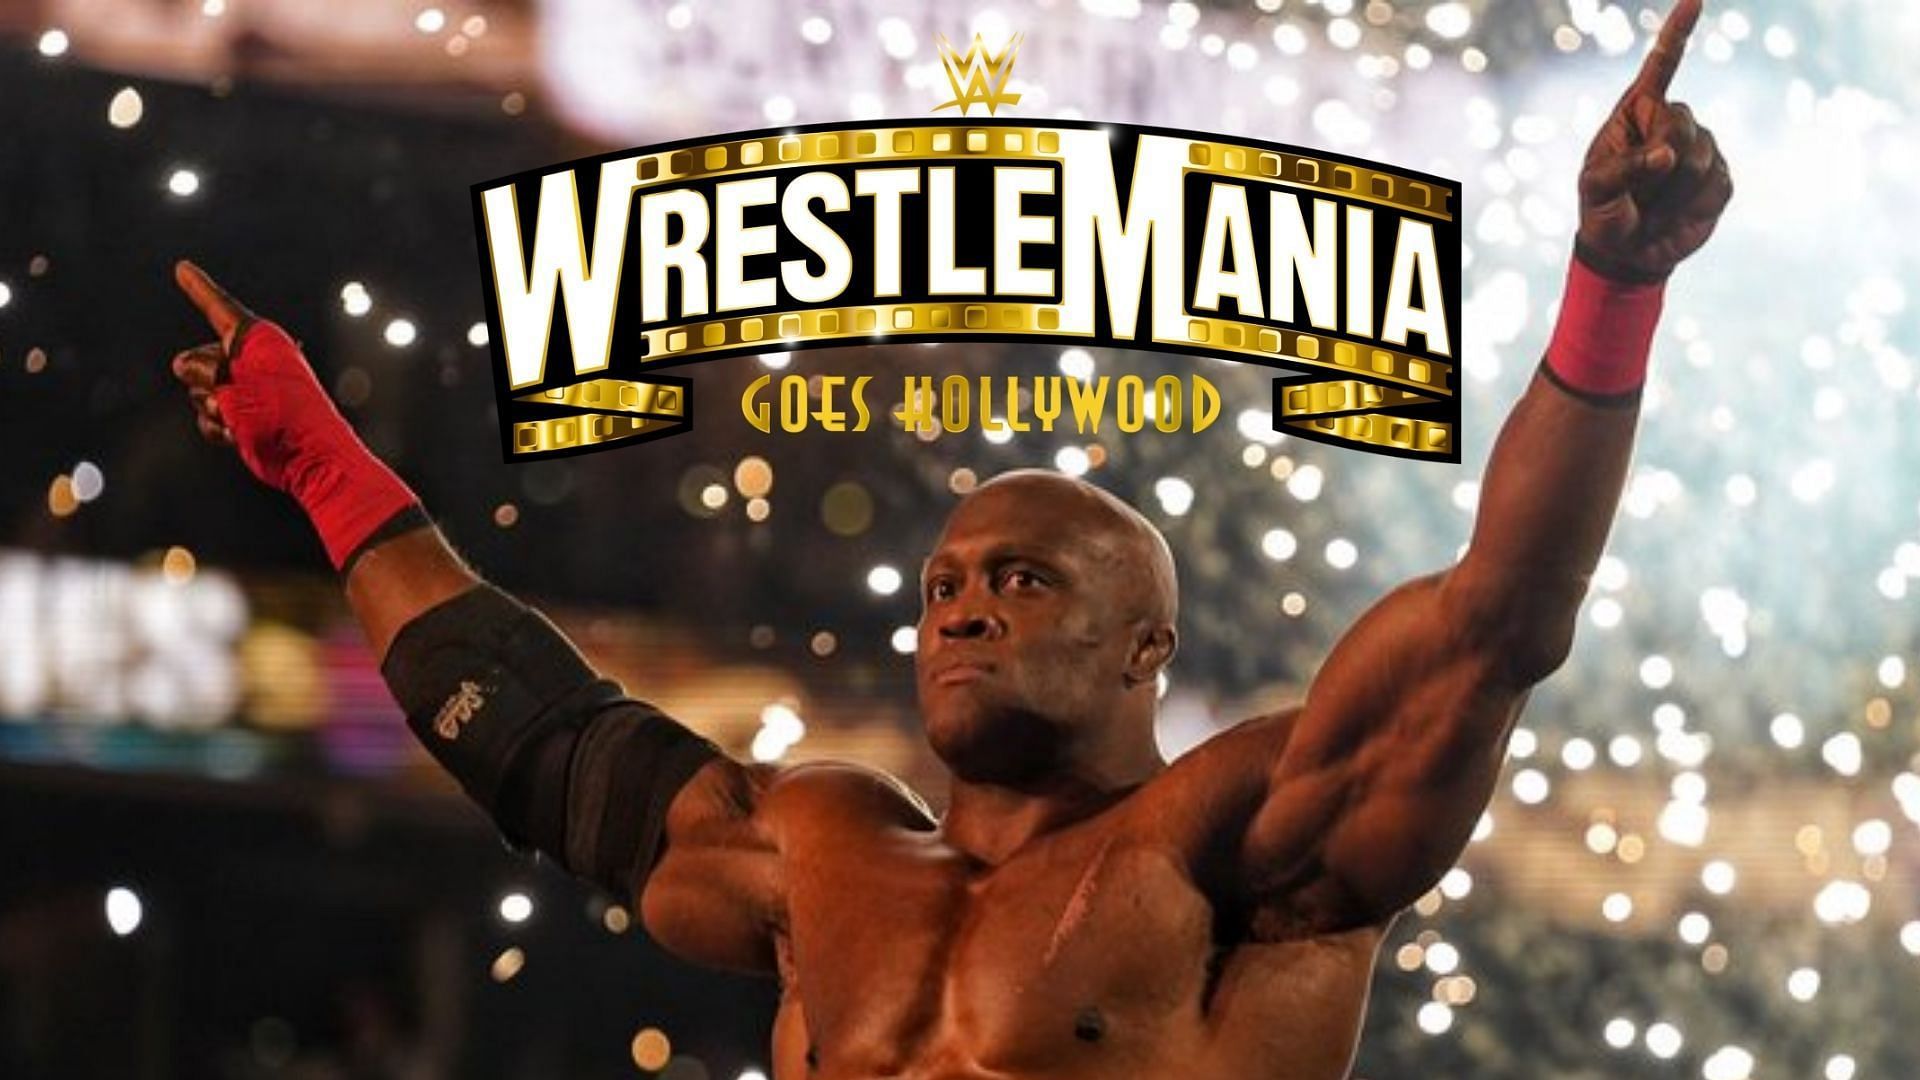 Bobby Lashley has not been booked for a match at WrestleMania 39 as of this writing.